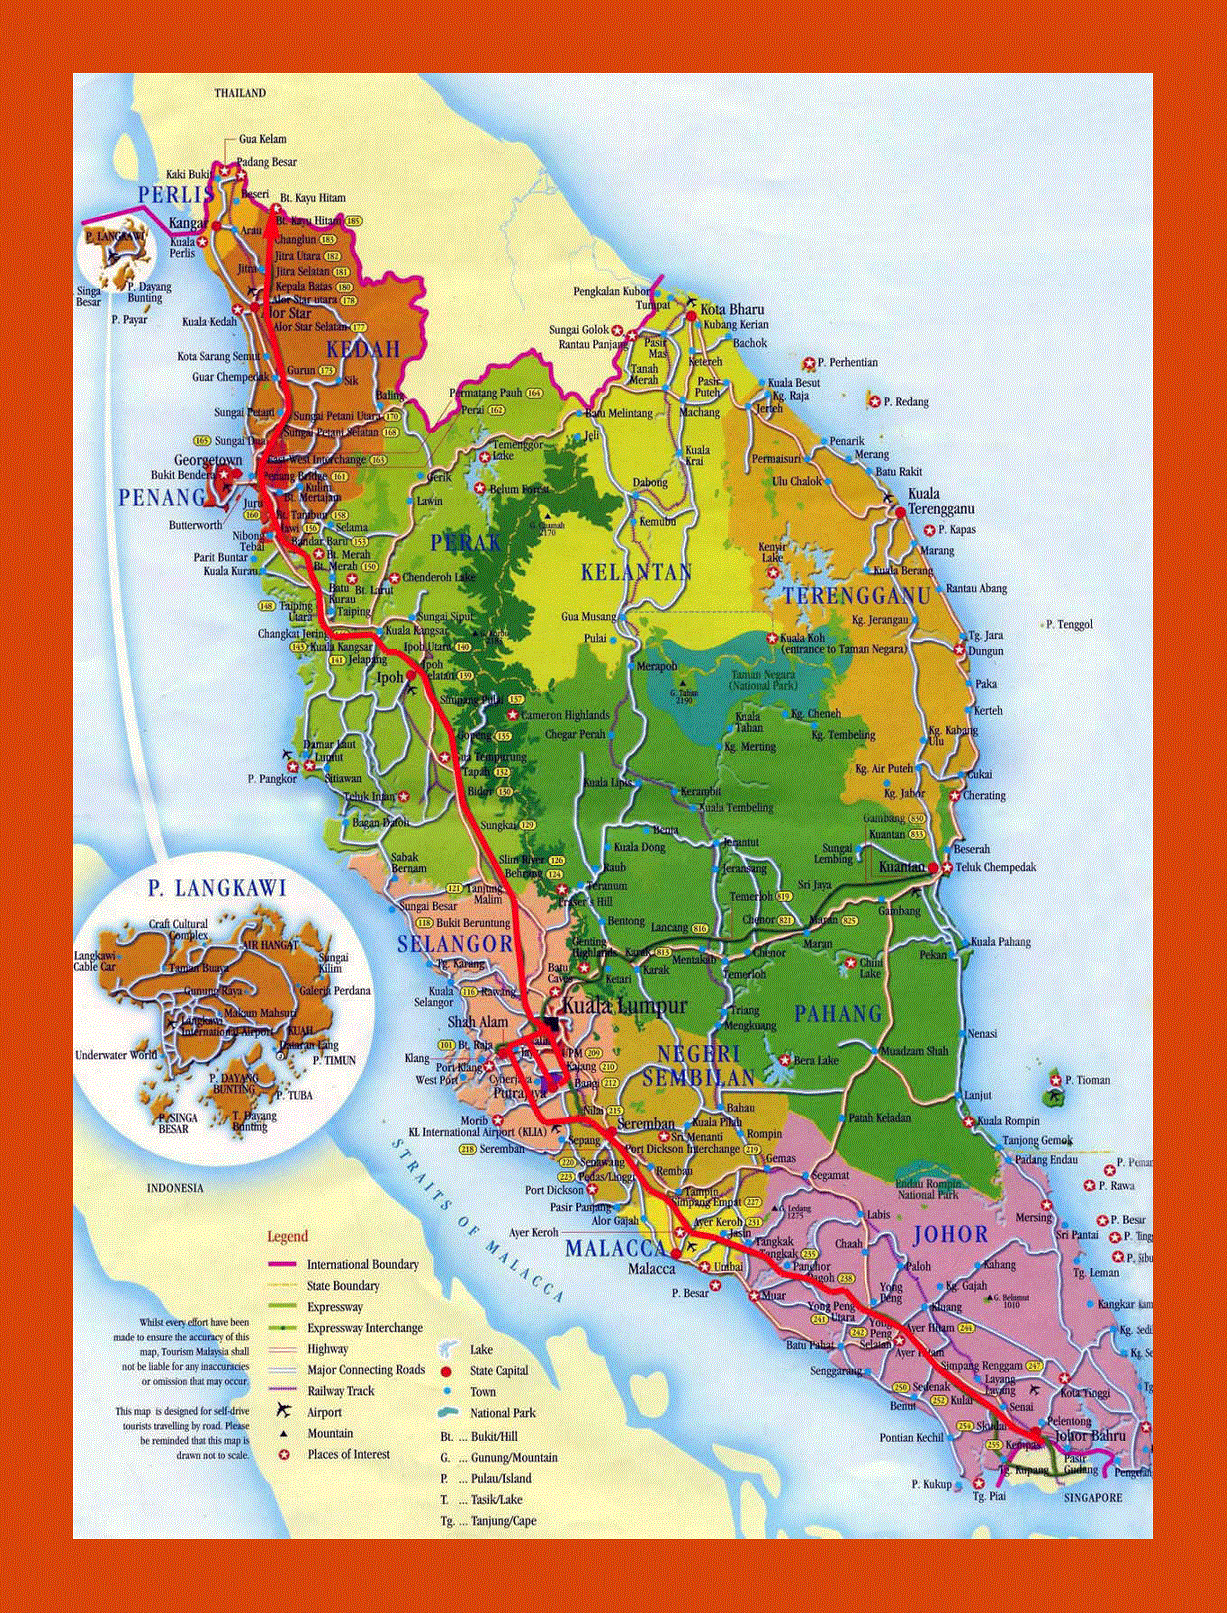 Tourist and administrative map of West Malaysia